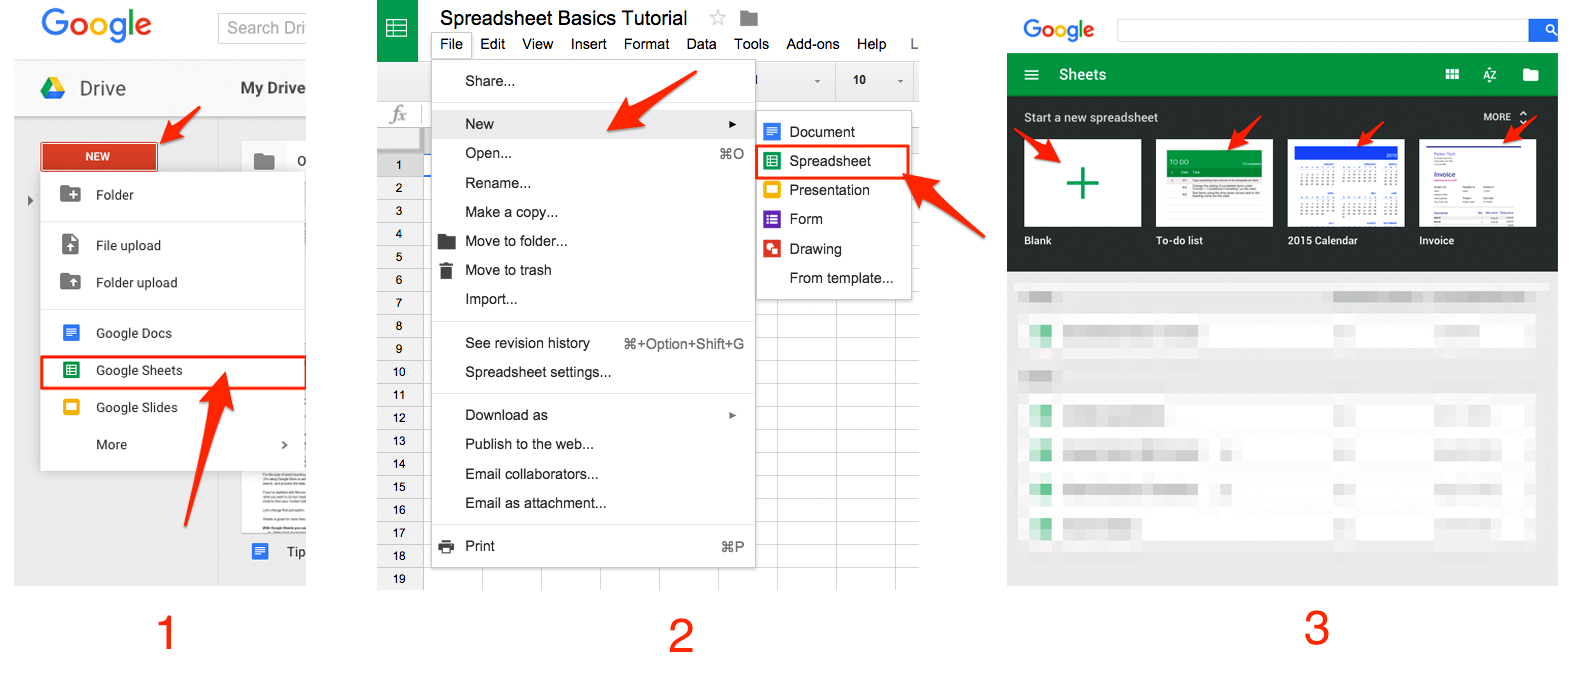 How To Create An Excel Spreadsheet With Formulas Inside Google Sheets 101: The Beginner's Guide To Online Spreadsheets  The